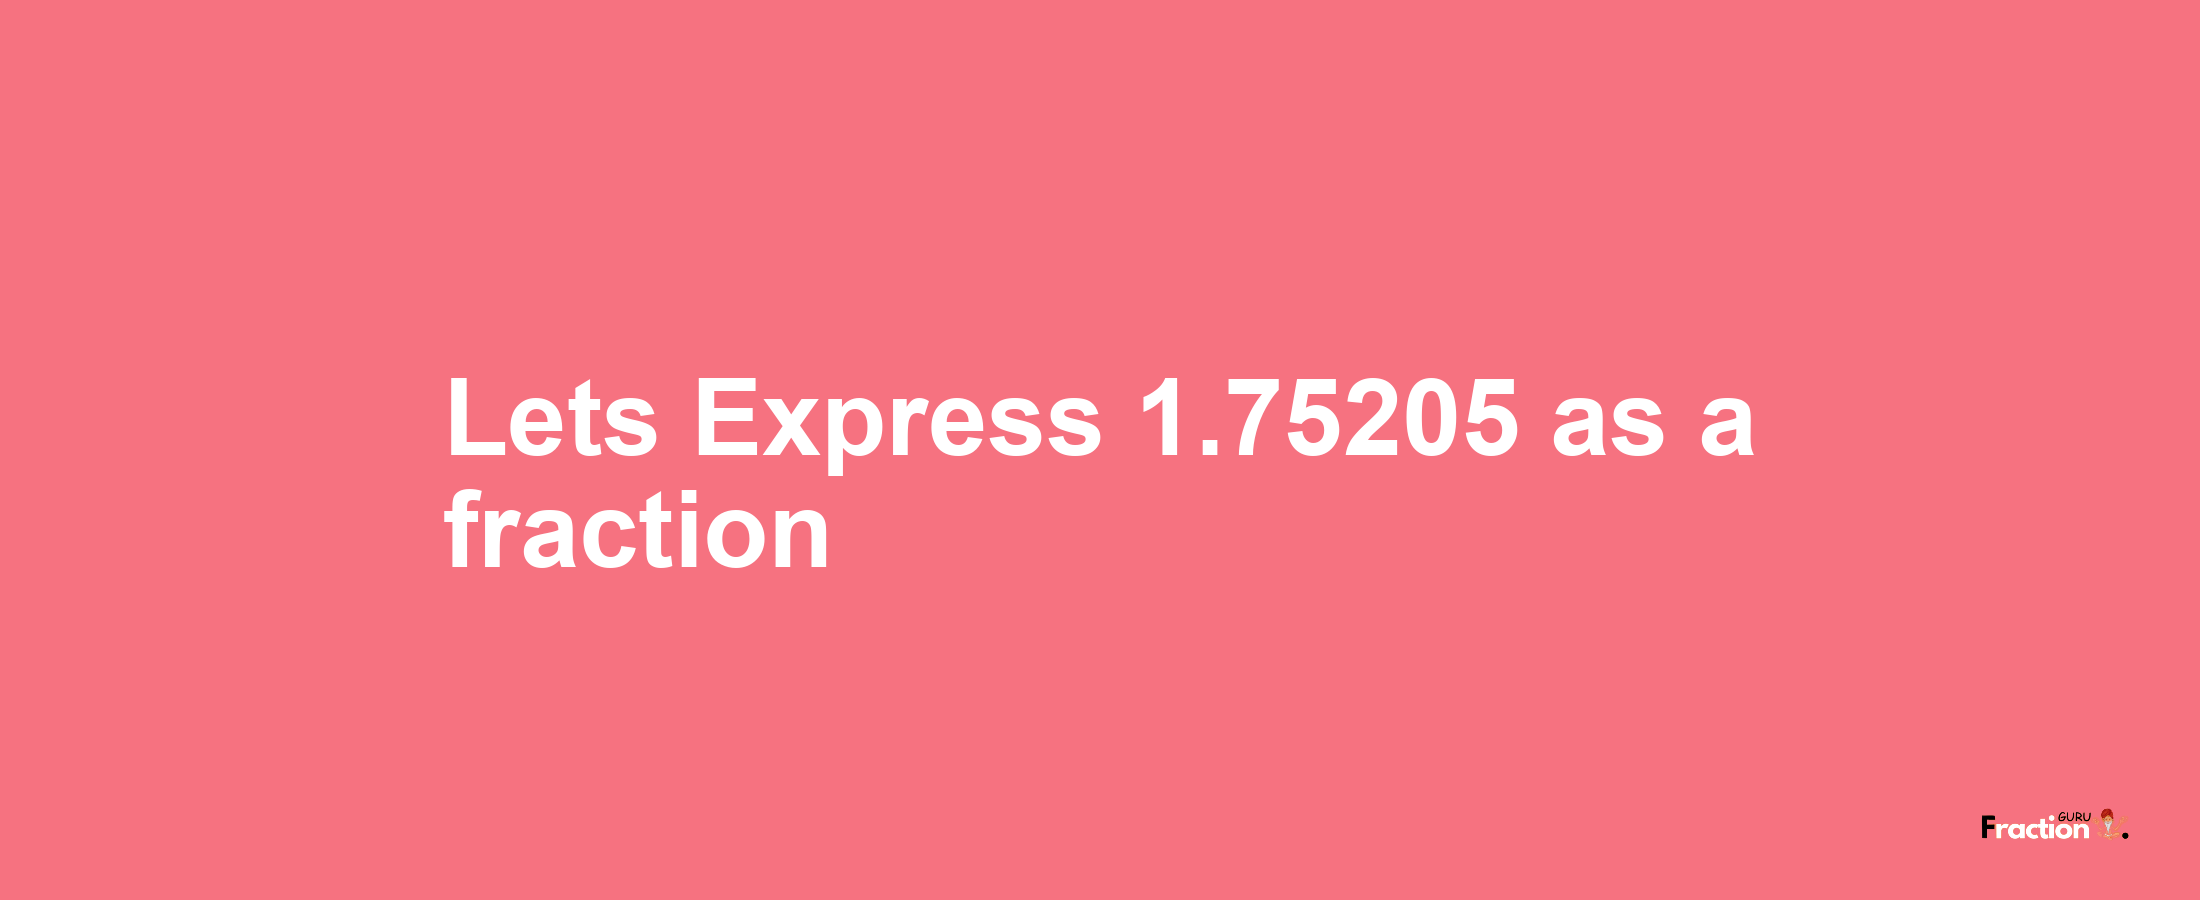 Lets Express 1.75205 as afraction